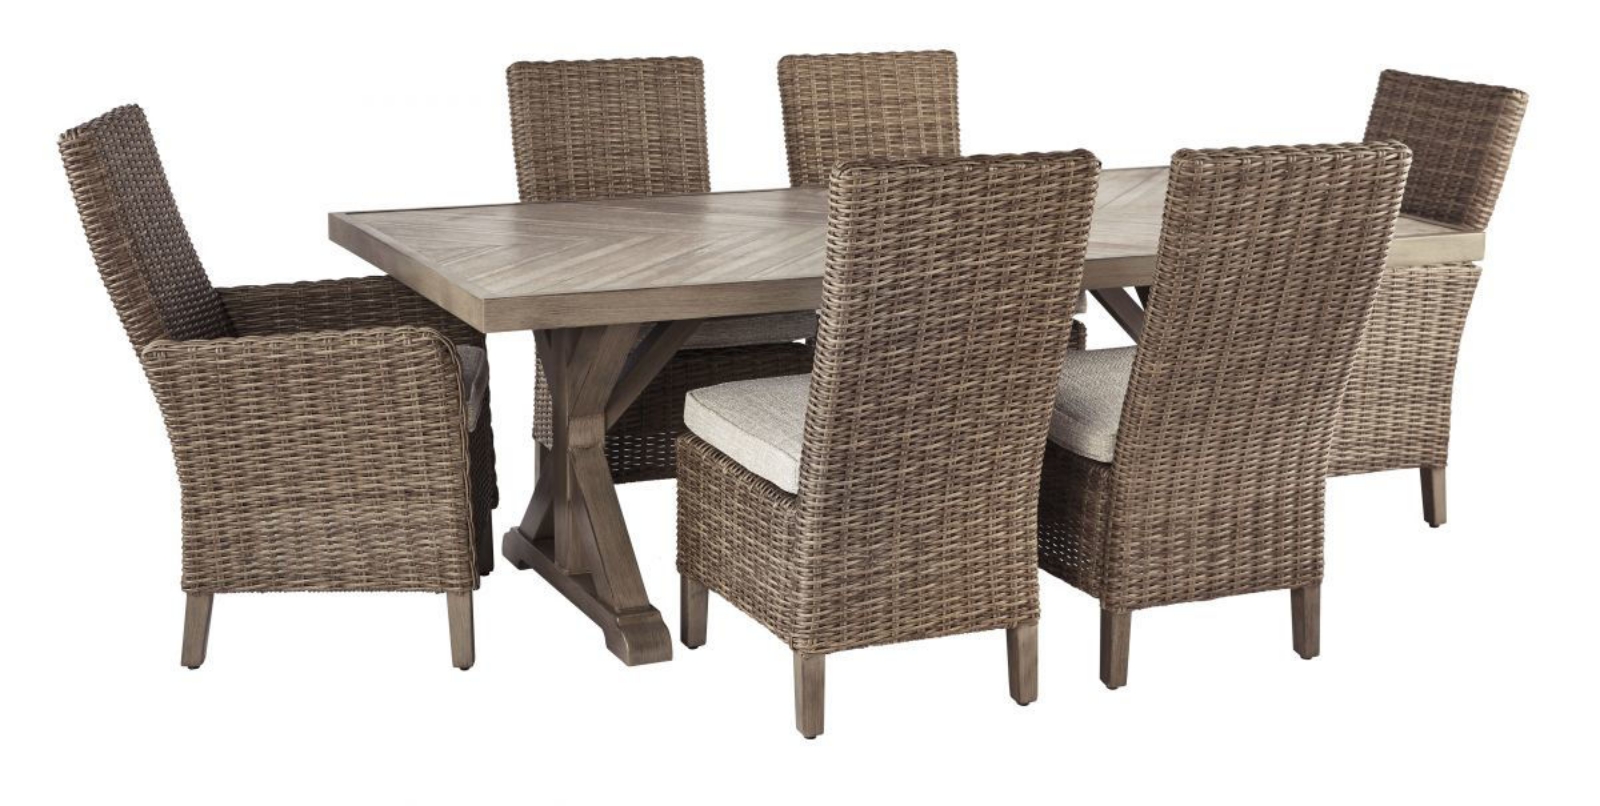 Picture of Beachcroft Patio Table & 6 Chairs